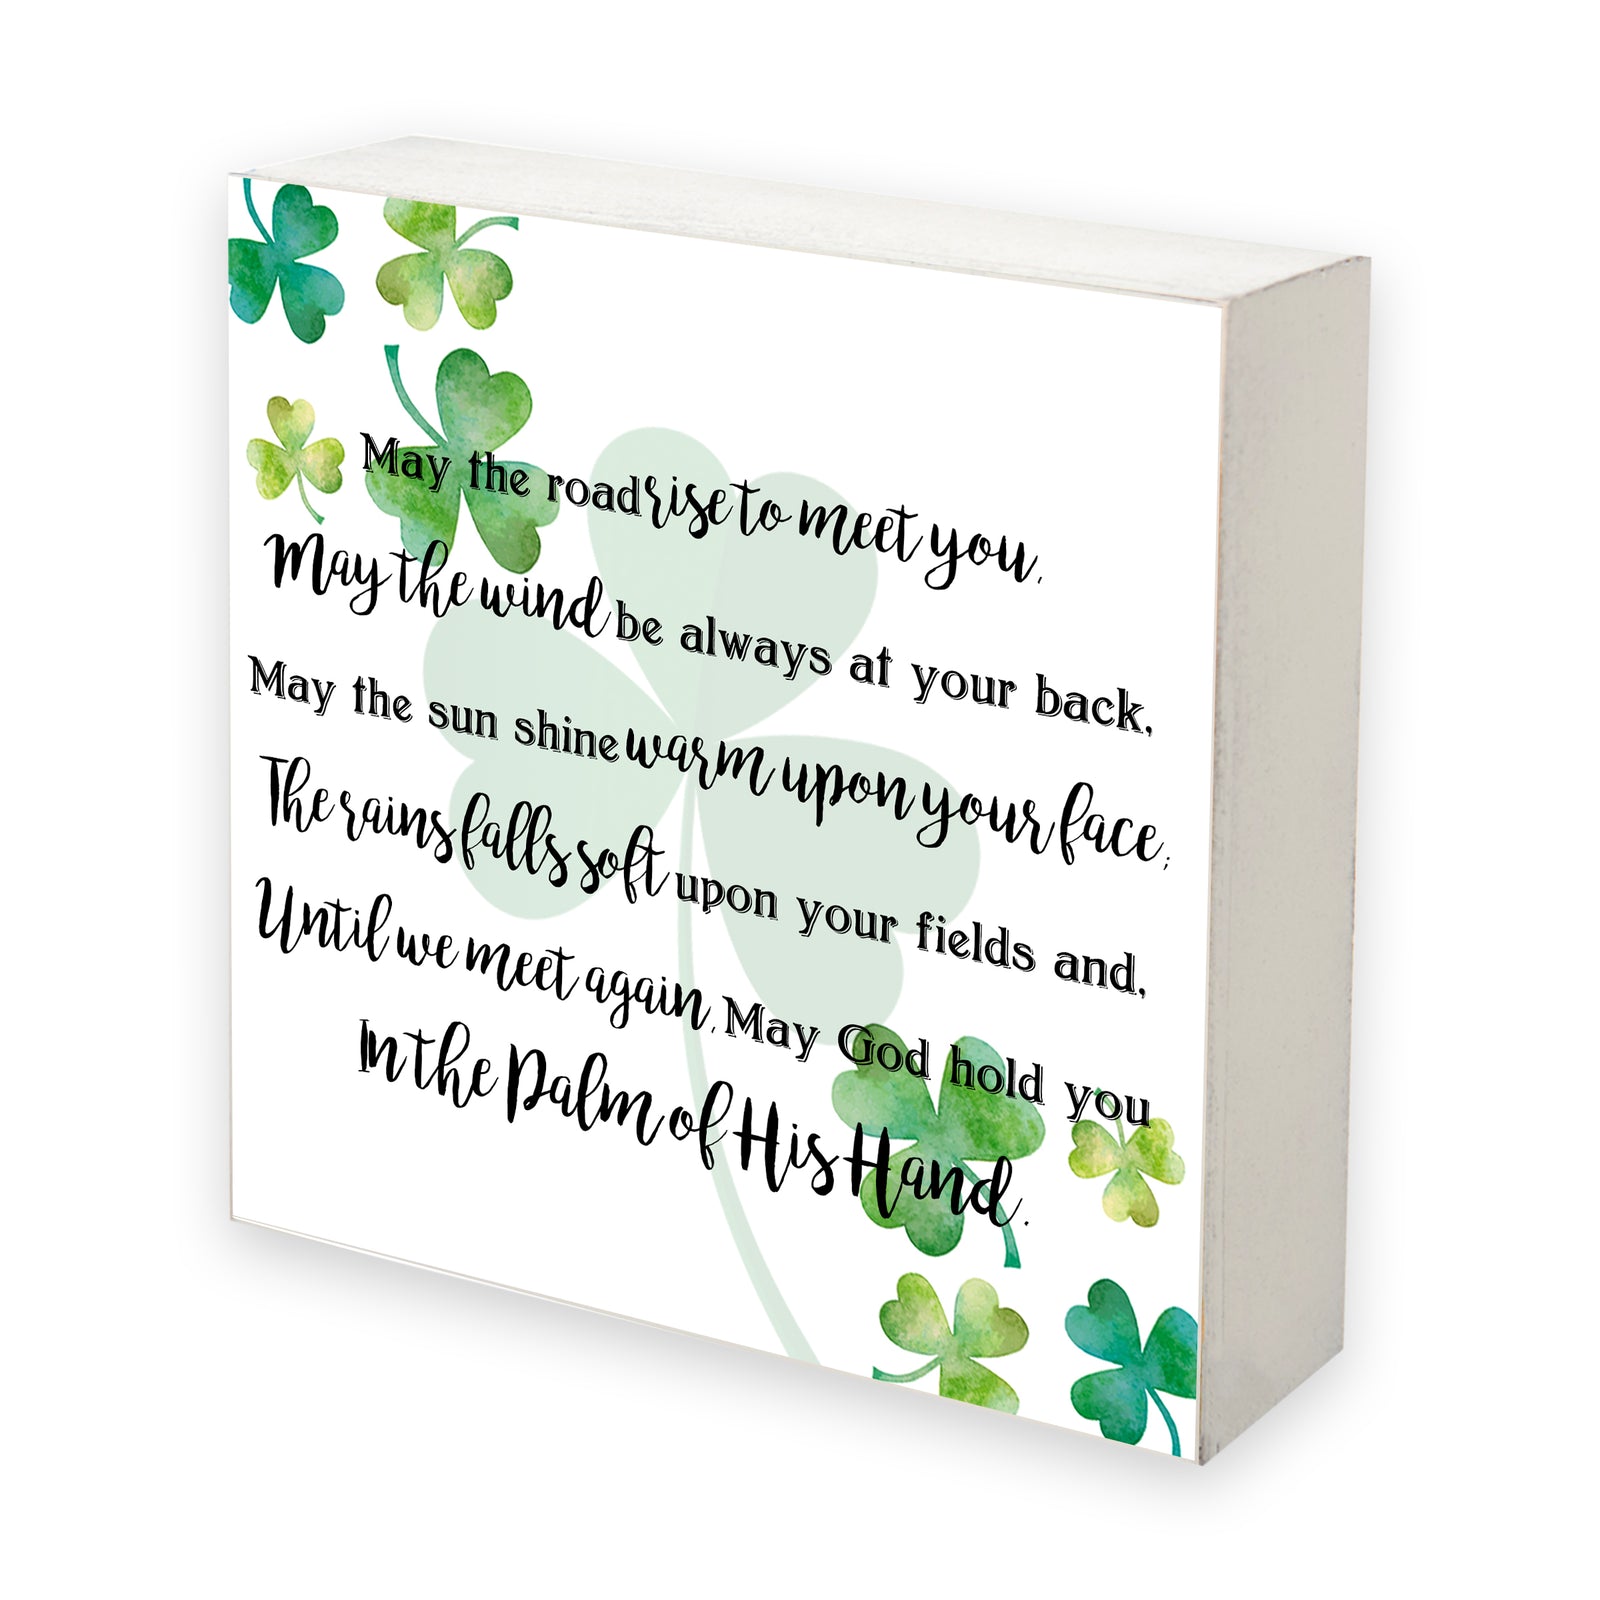 St. Patrick’s Day Irish Everyday Shadow Box 10x10 - May The Road Rise